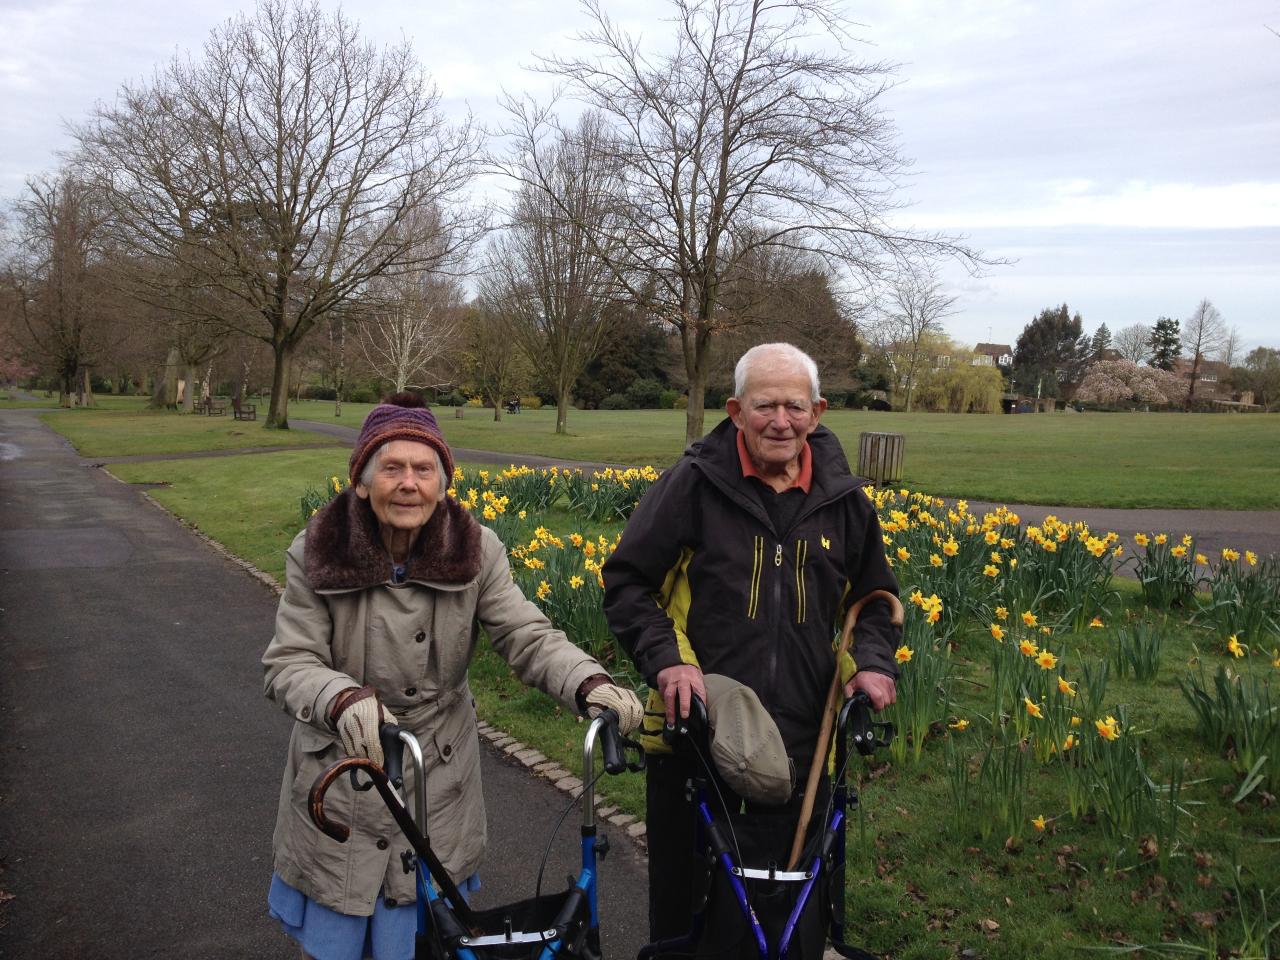 Rosemary Phillips' parents on a walk in the park